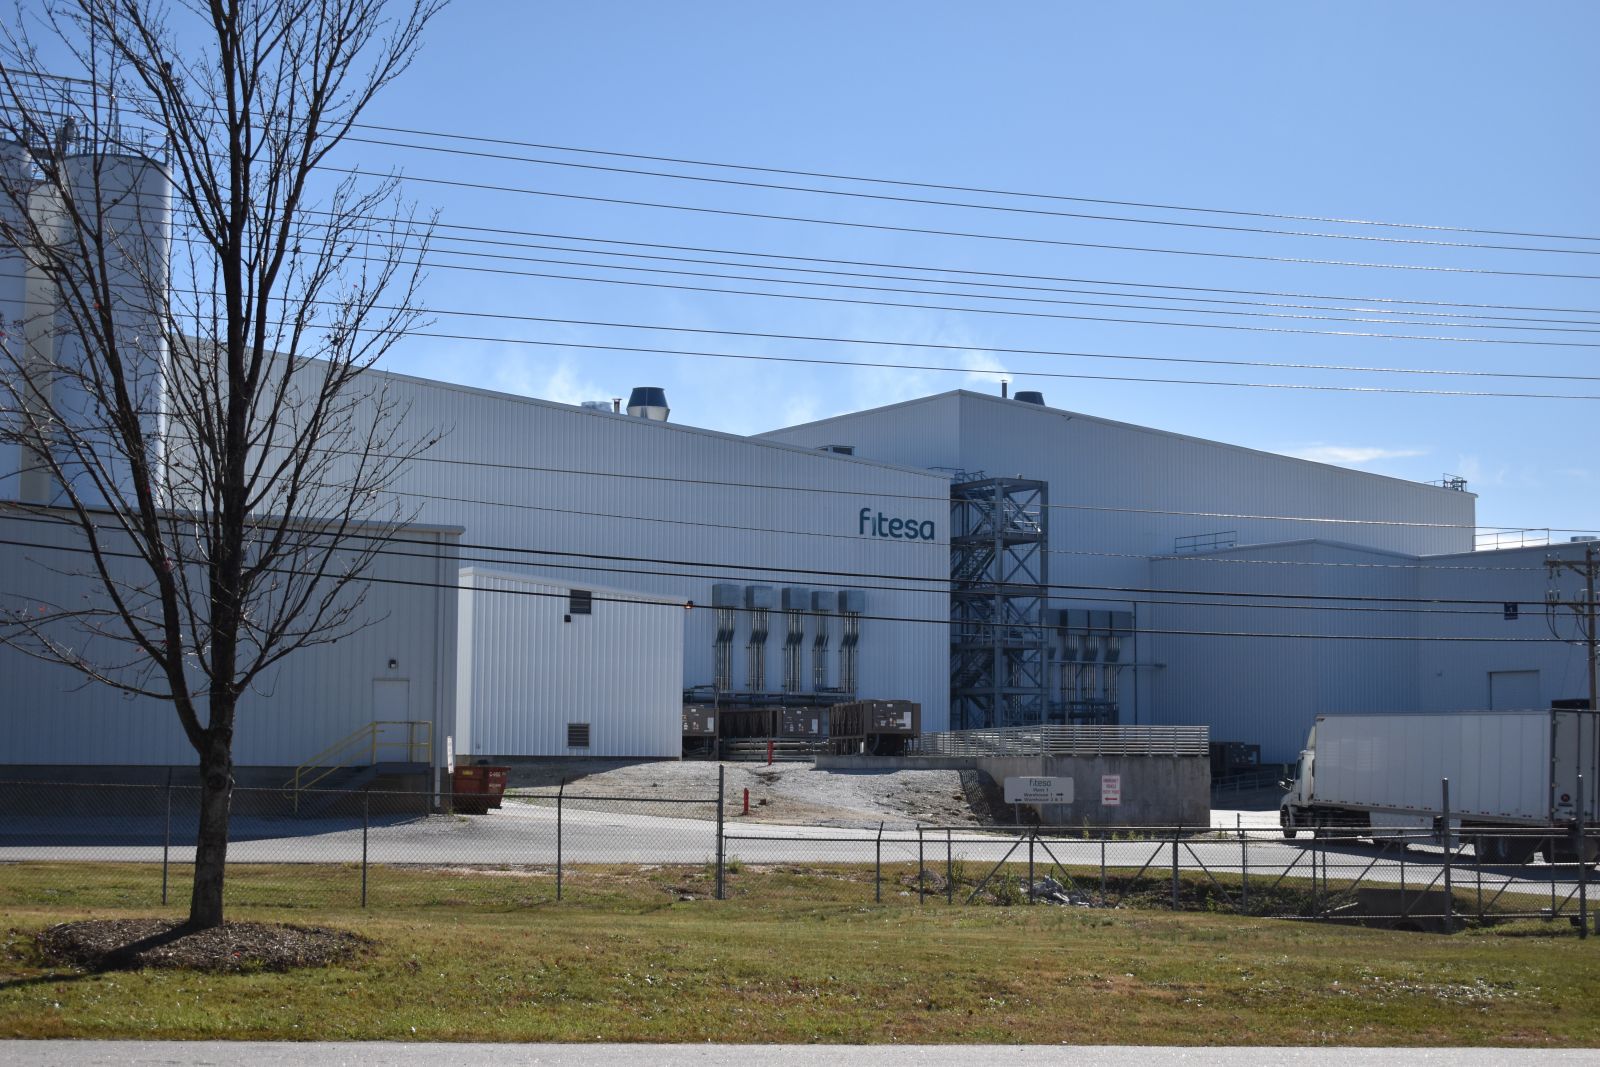 Fitesa's Simpsonville plant is one of several global locations set to expand under the company's current investment plan. (Photo/Molly Hulsey)